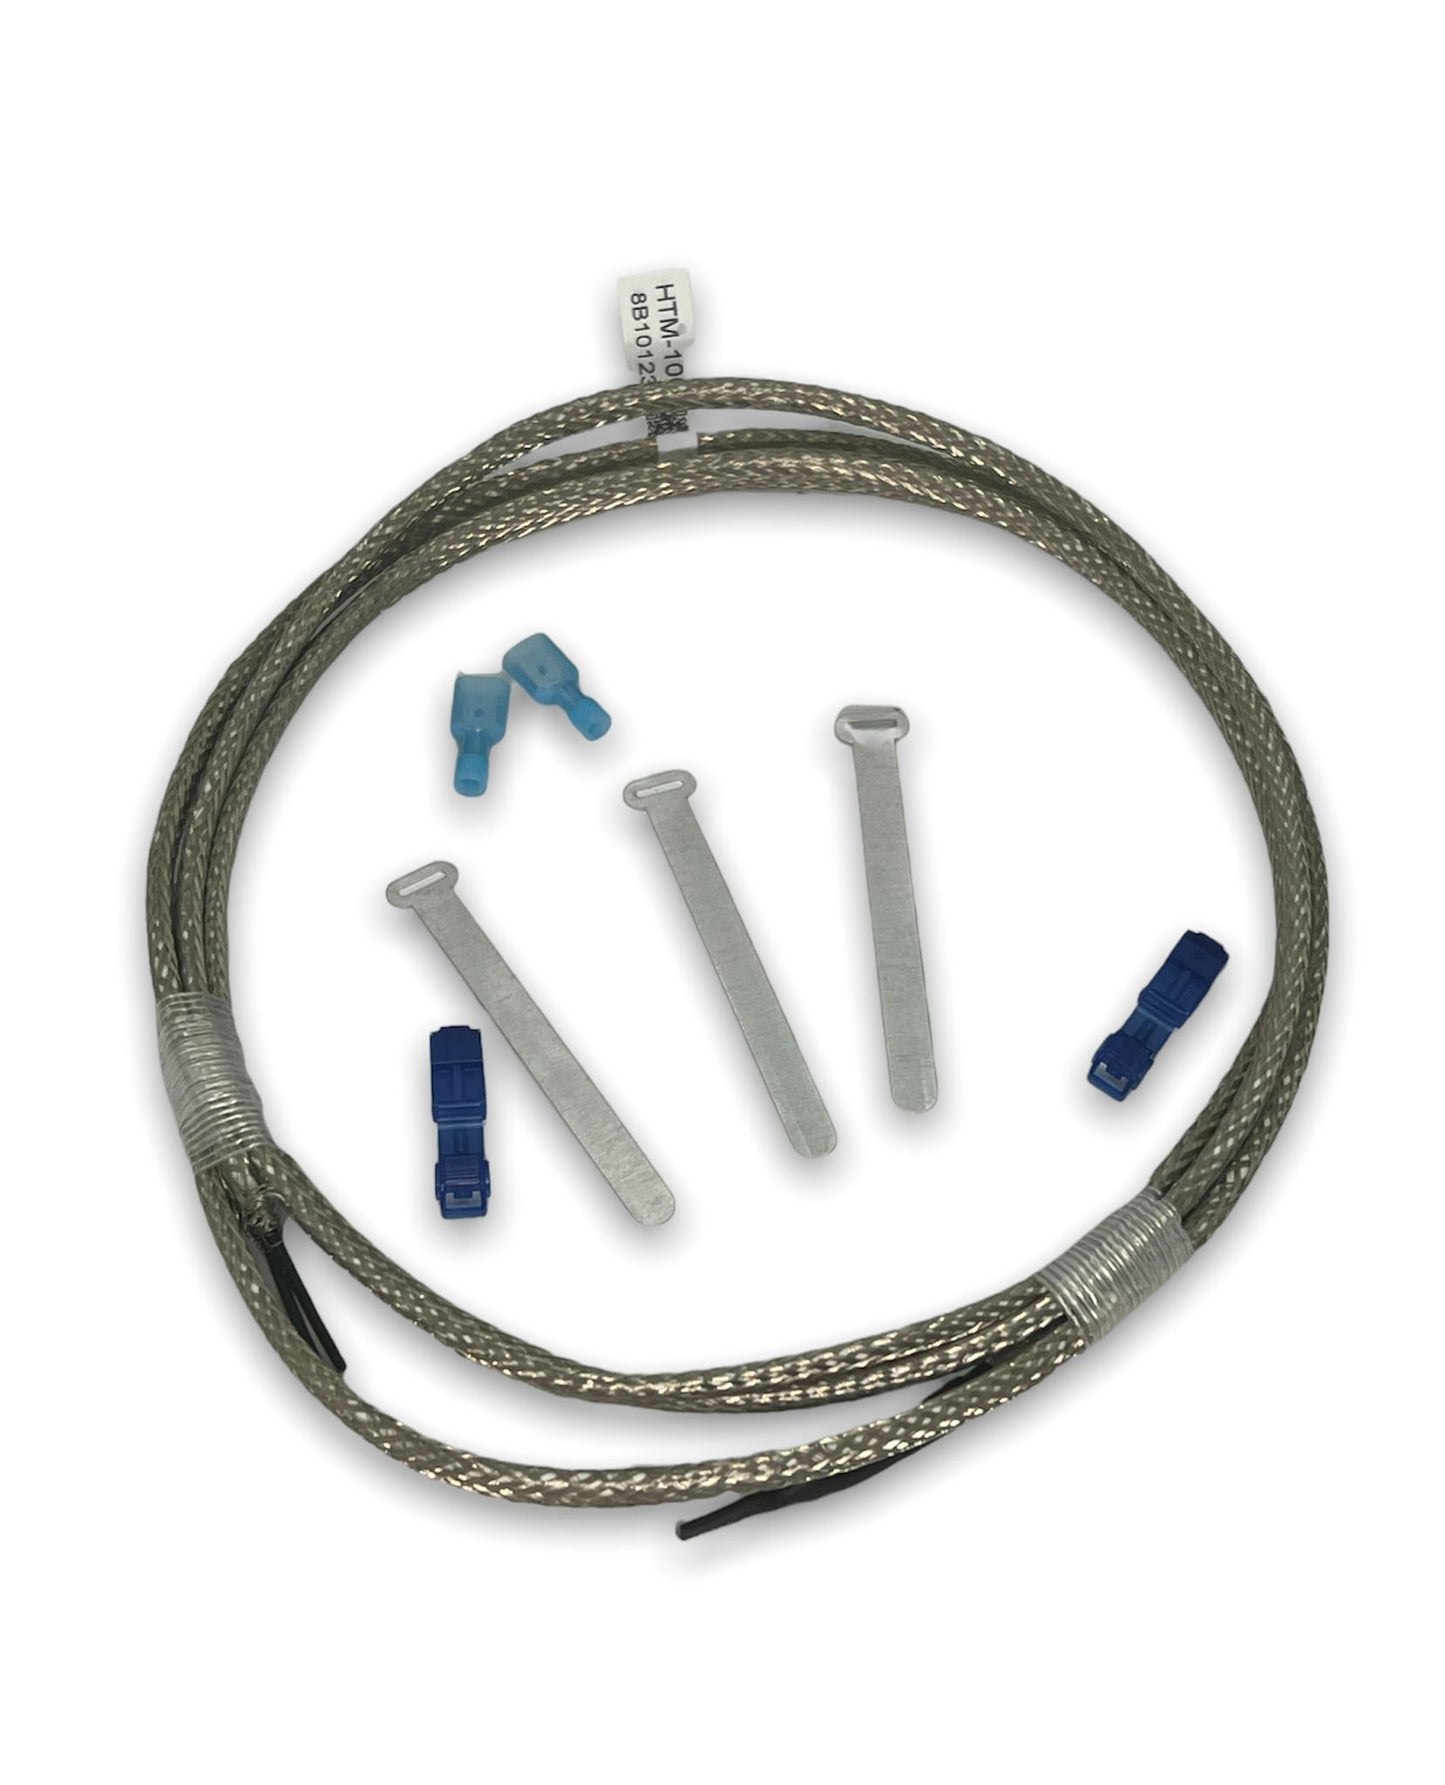 Drain Tube Heating Wire Kit for Samsung Refrigerators - ER20-00031A - Water leak and Drain issues repair kit INVERTEC